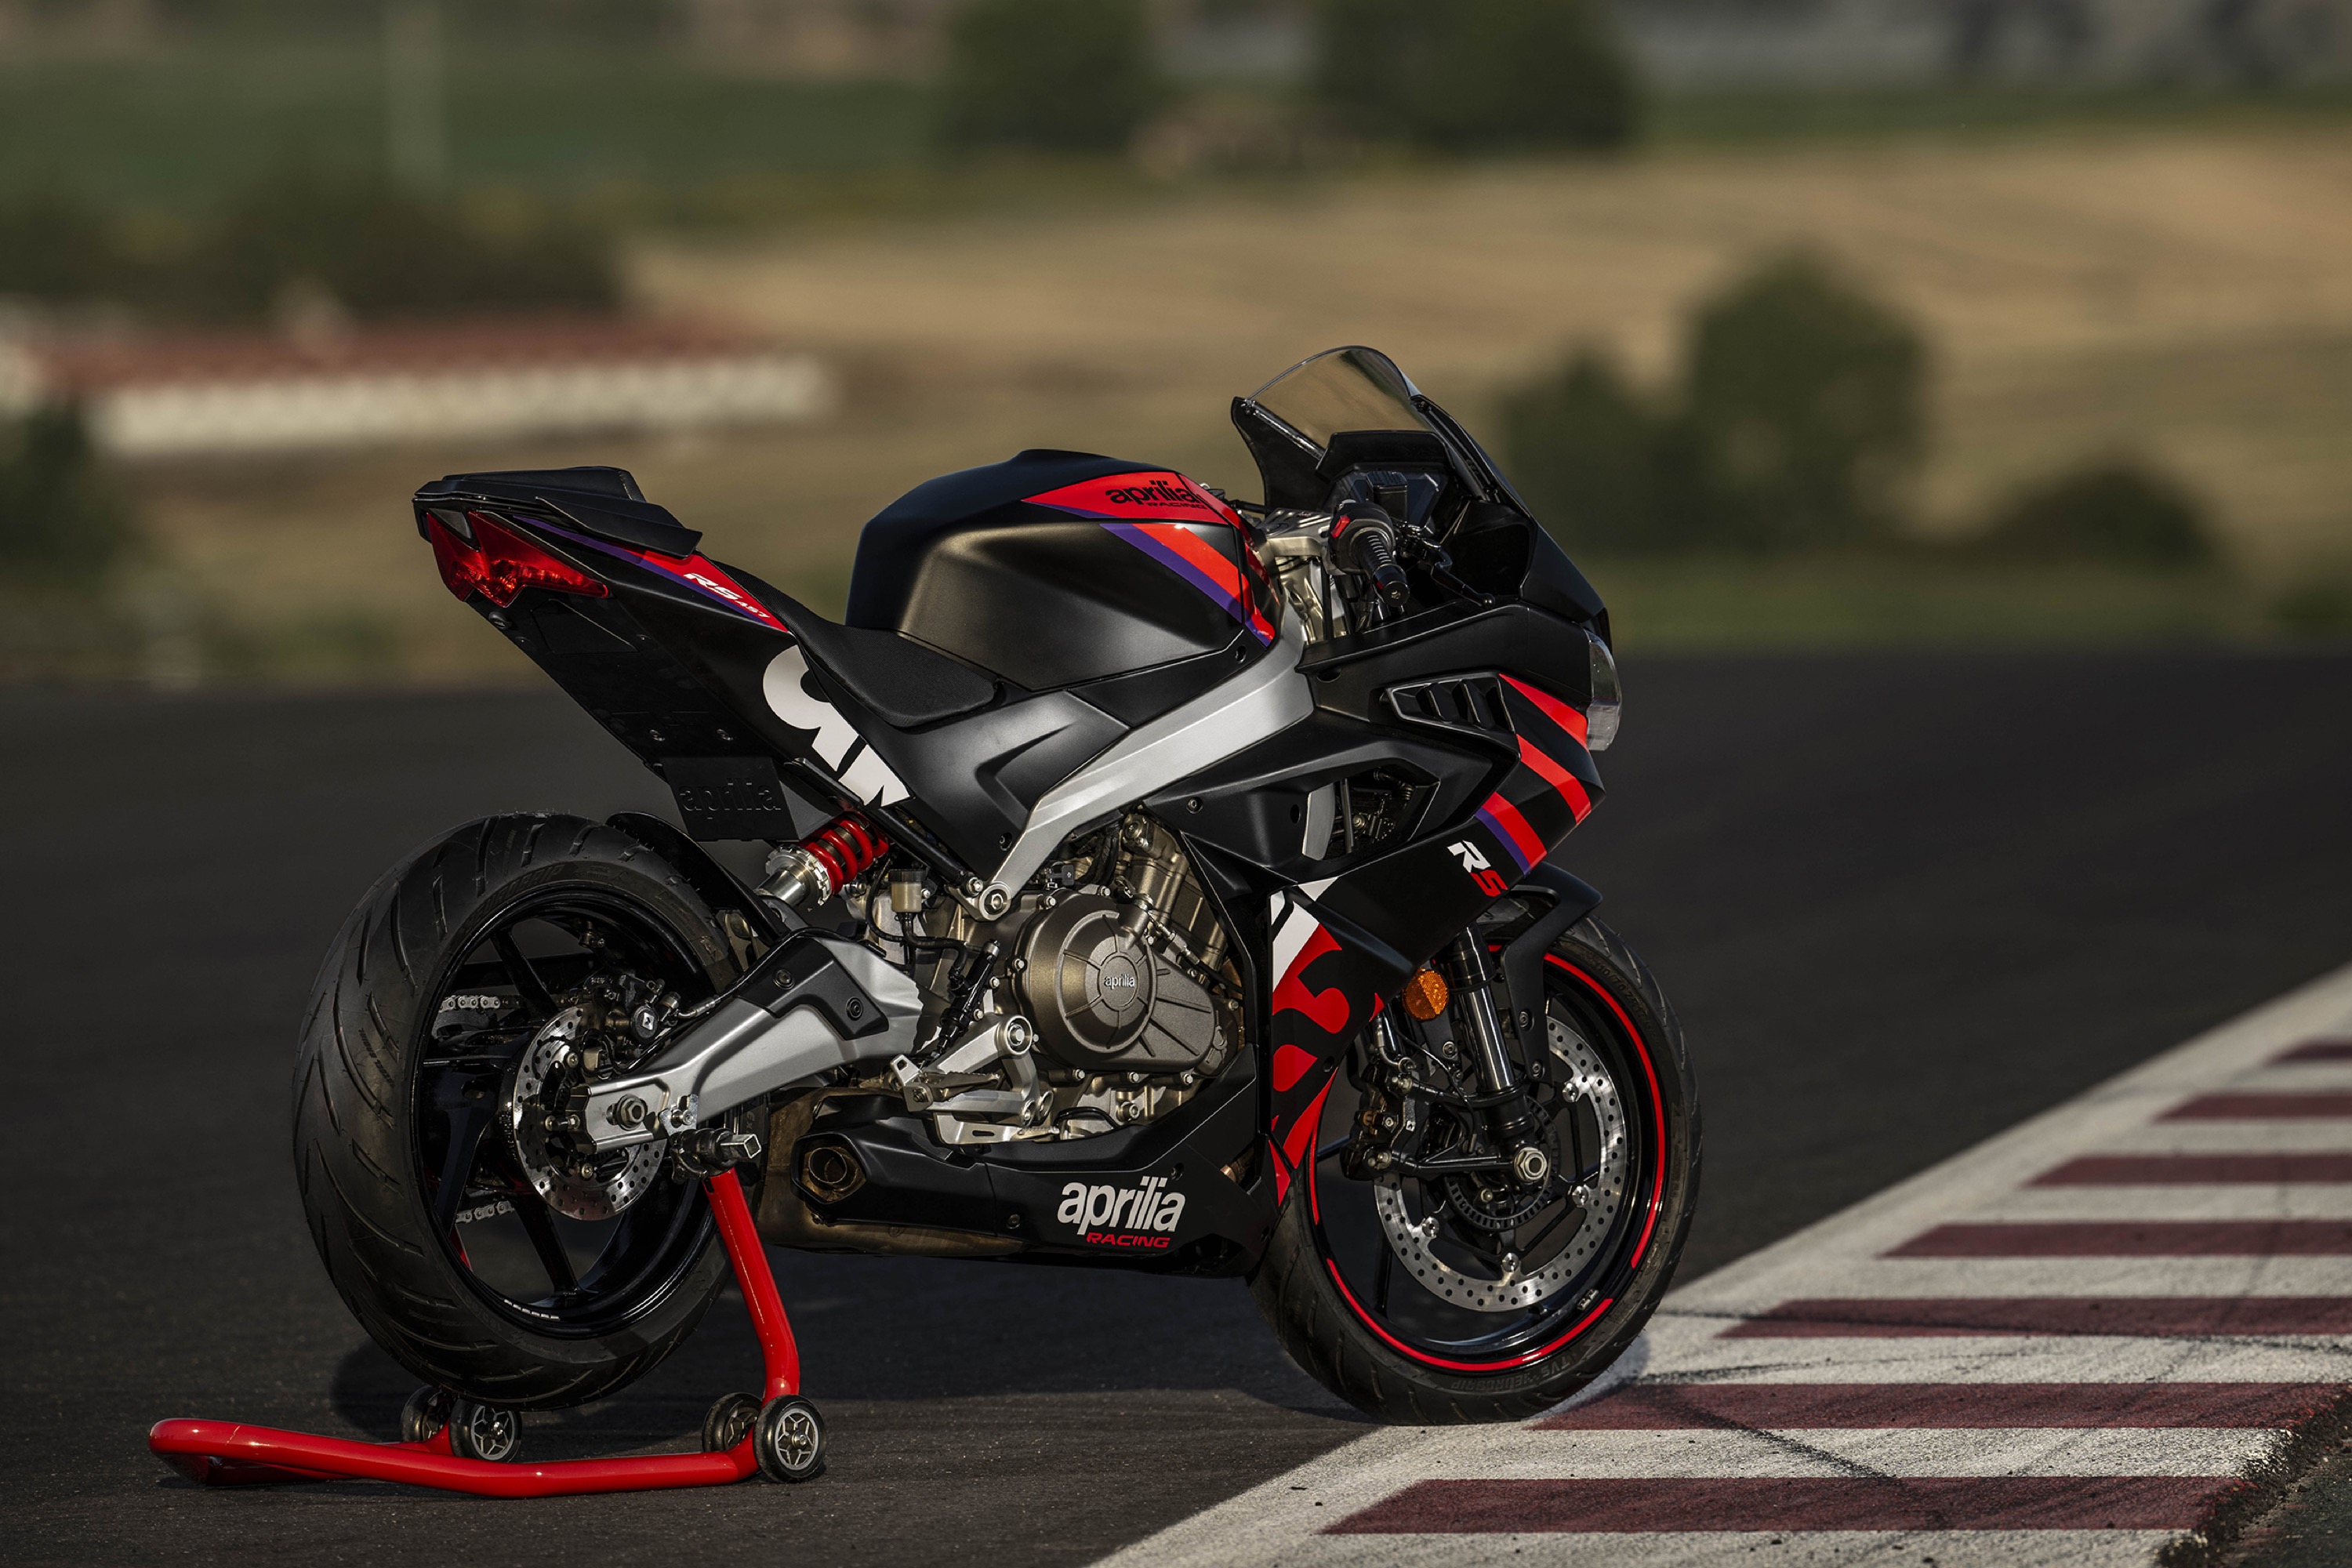 The Aprilia RS 457 has a kerb weight of 175 kg, while the 457 cc twin-cylinder motor develops 47 bhp